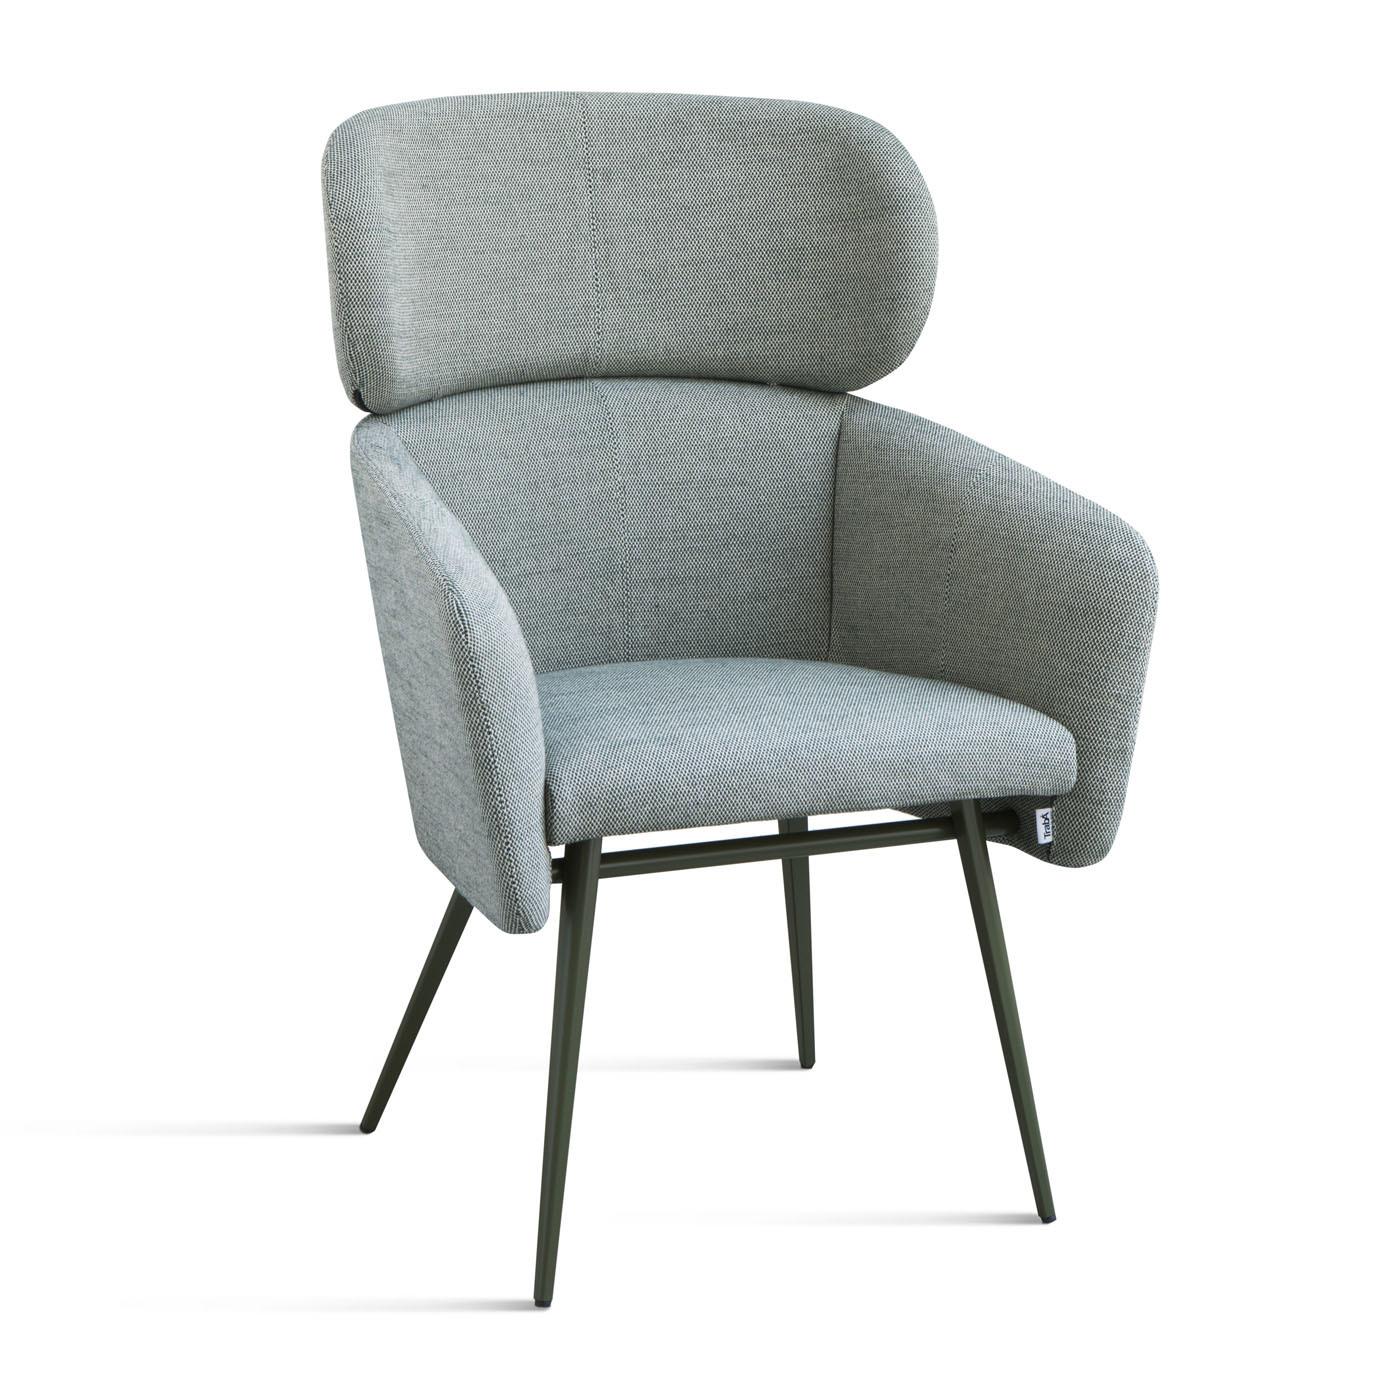 A perfect example of refined craftsmanship, this striking chair exudes comfort and sophistication. A larger version of the Balù chair designed by Emilio Nanni, it features a beechwood structure with slanted legs, and a seat and tall, enveloping back